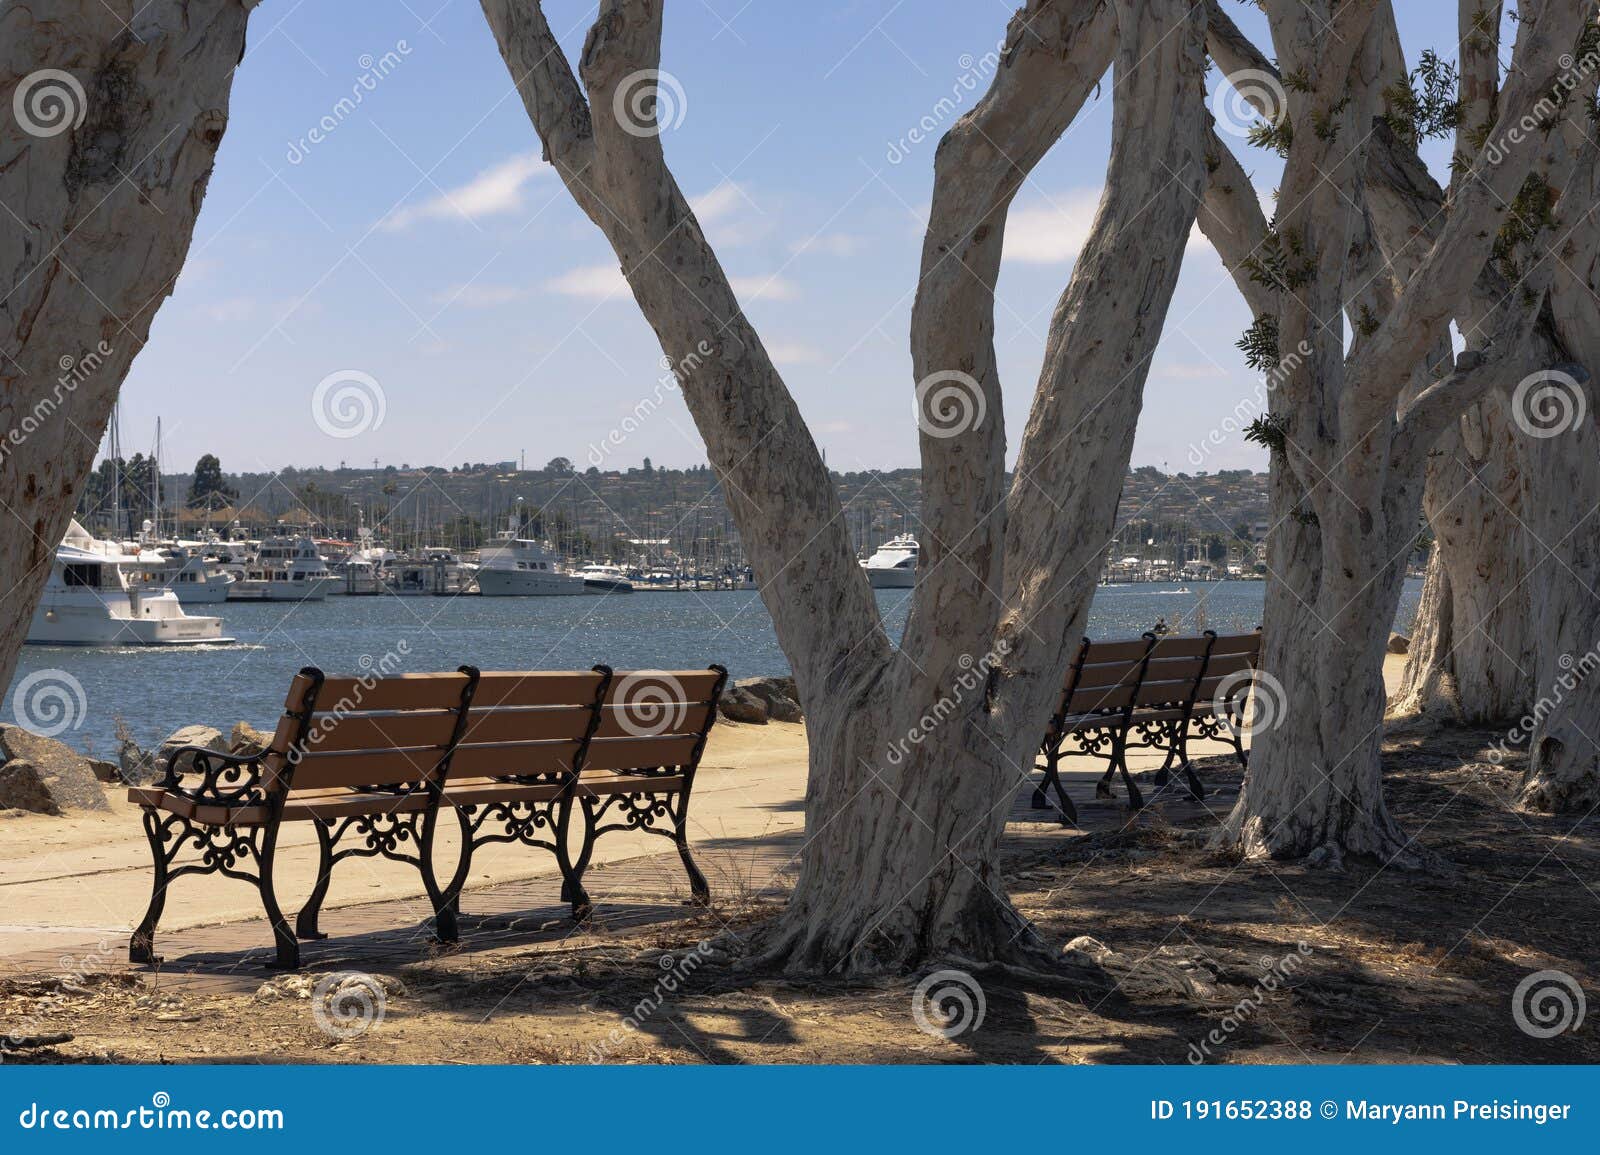 san diego park benches at shoreline by the bay and historical spanish landing. boats and point loma in the distance.